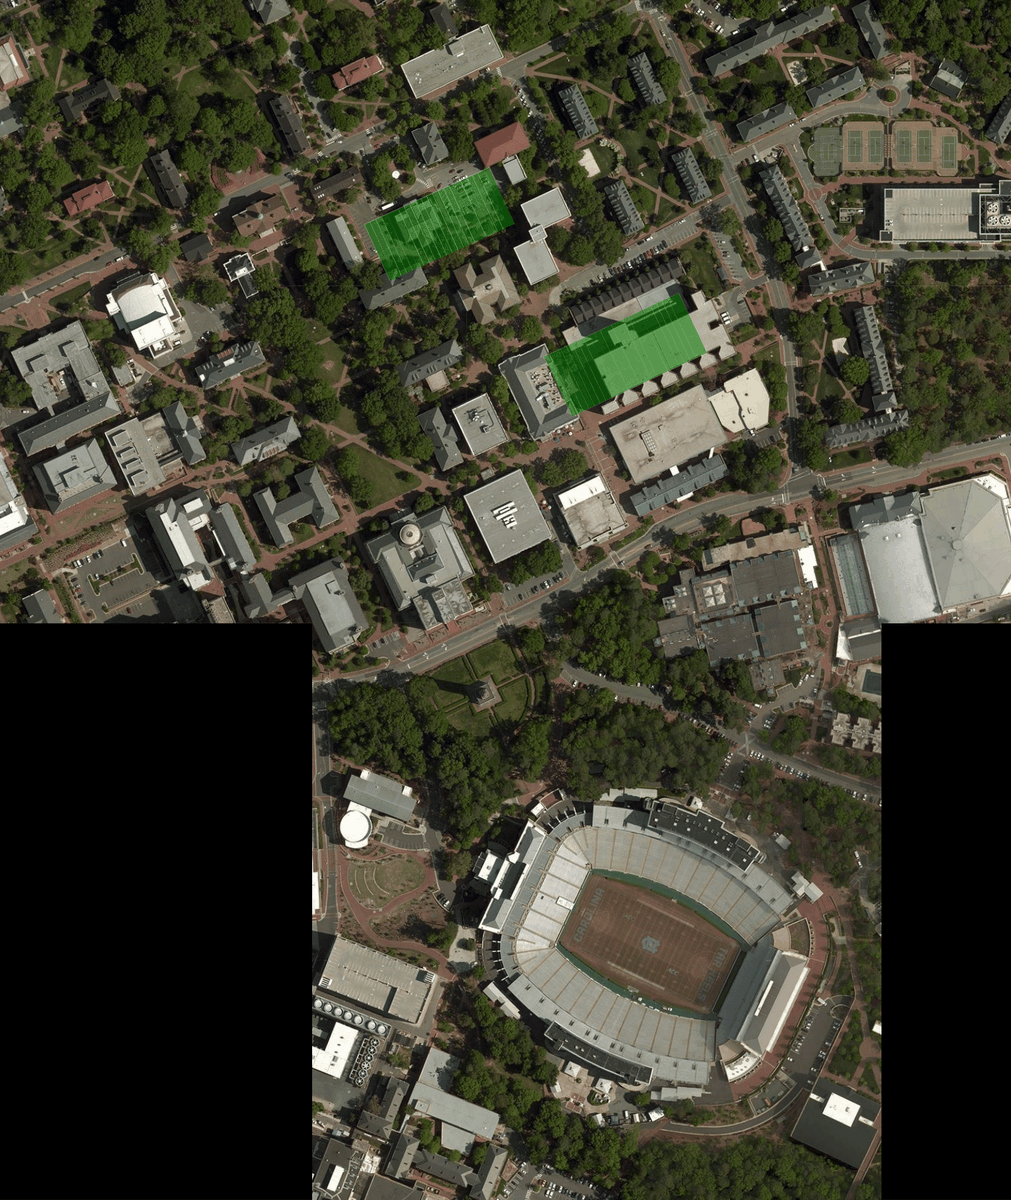  #ForgottenFields UNC Campus Athletic Field I (north, 1888-1904) and Campus Athletic Field II/Emerson Field (1906-1927)